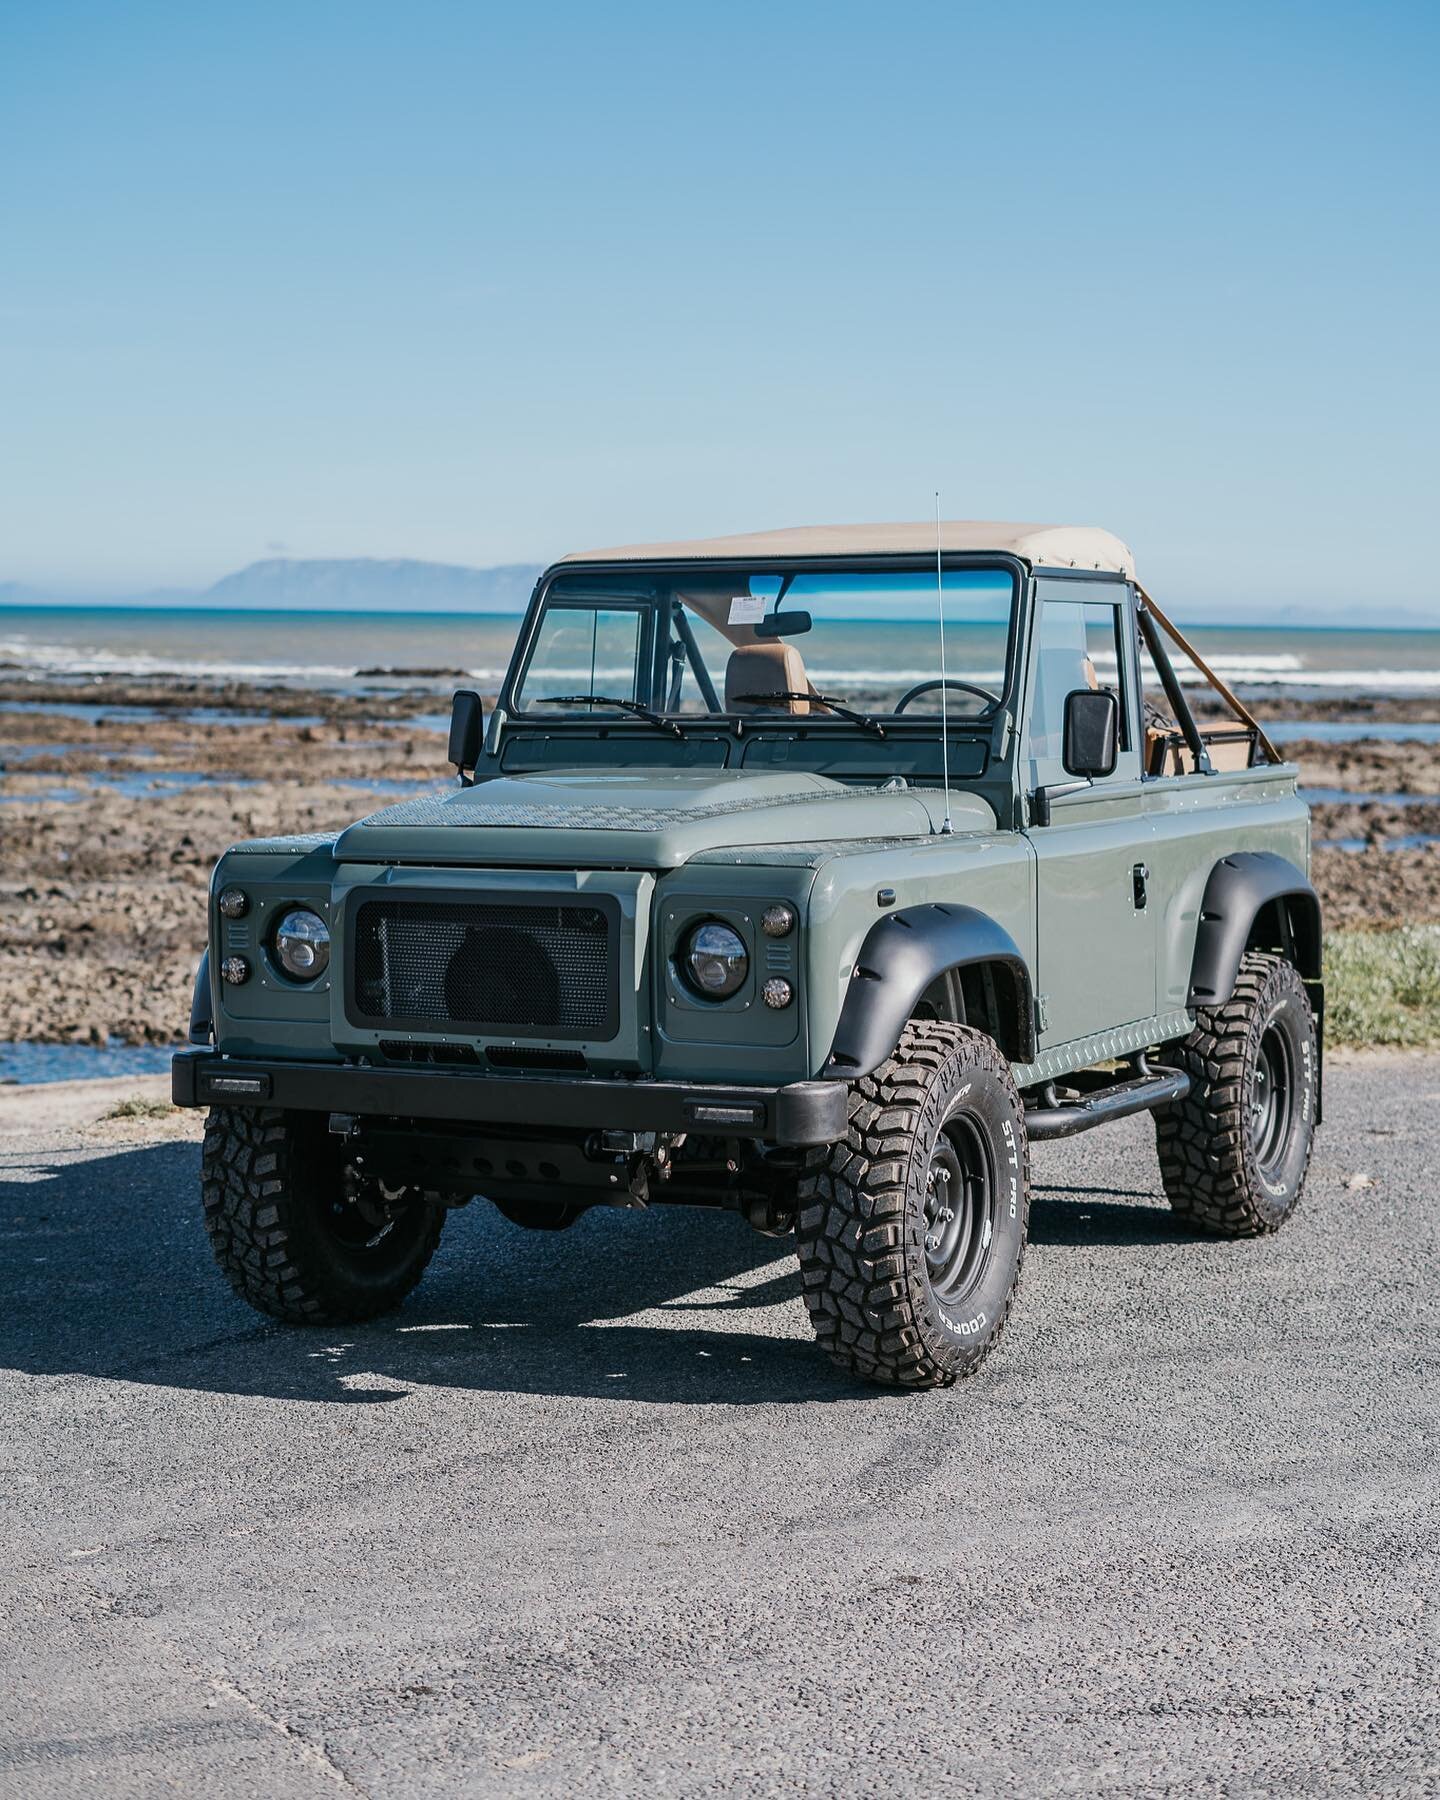 This #defender90 will become your new dream beach car🙌. And it&rsquo;s all thanks to #ponsteyn4x4